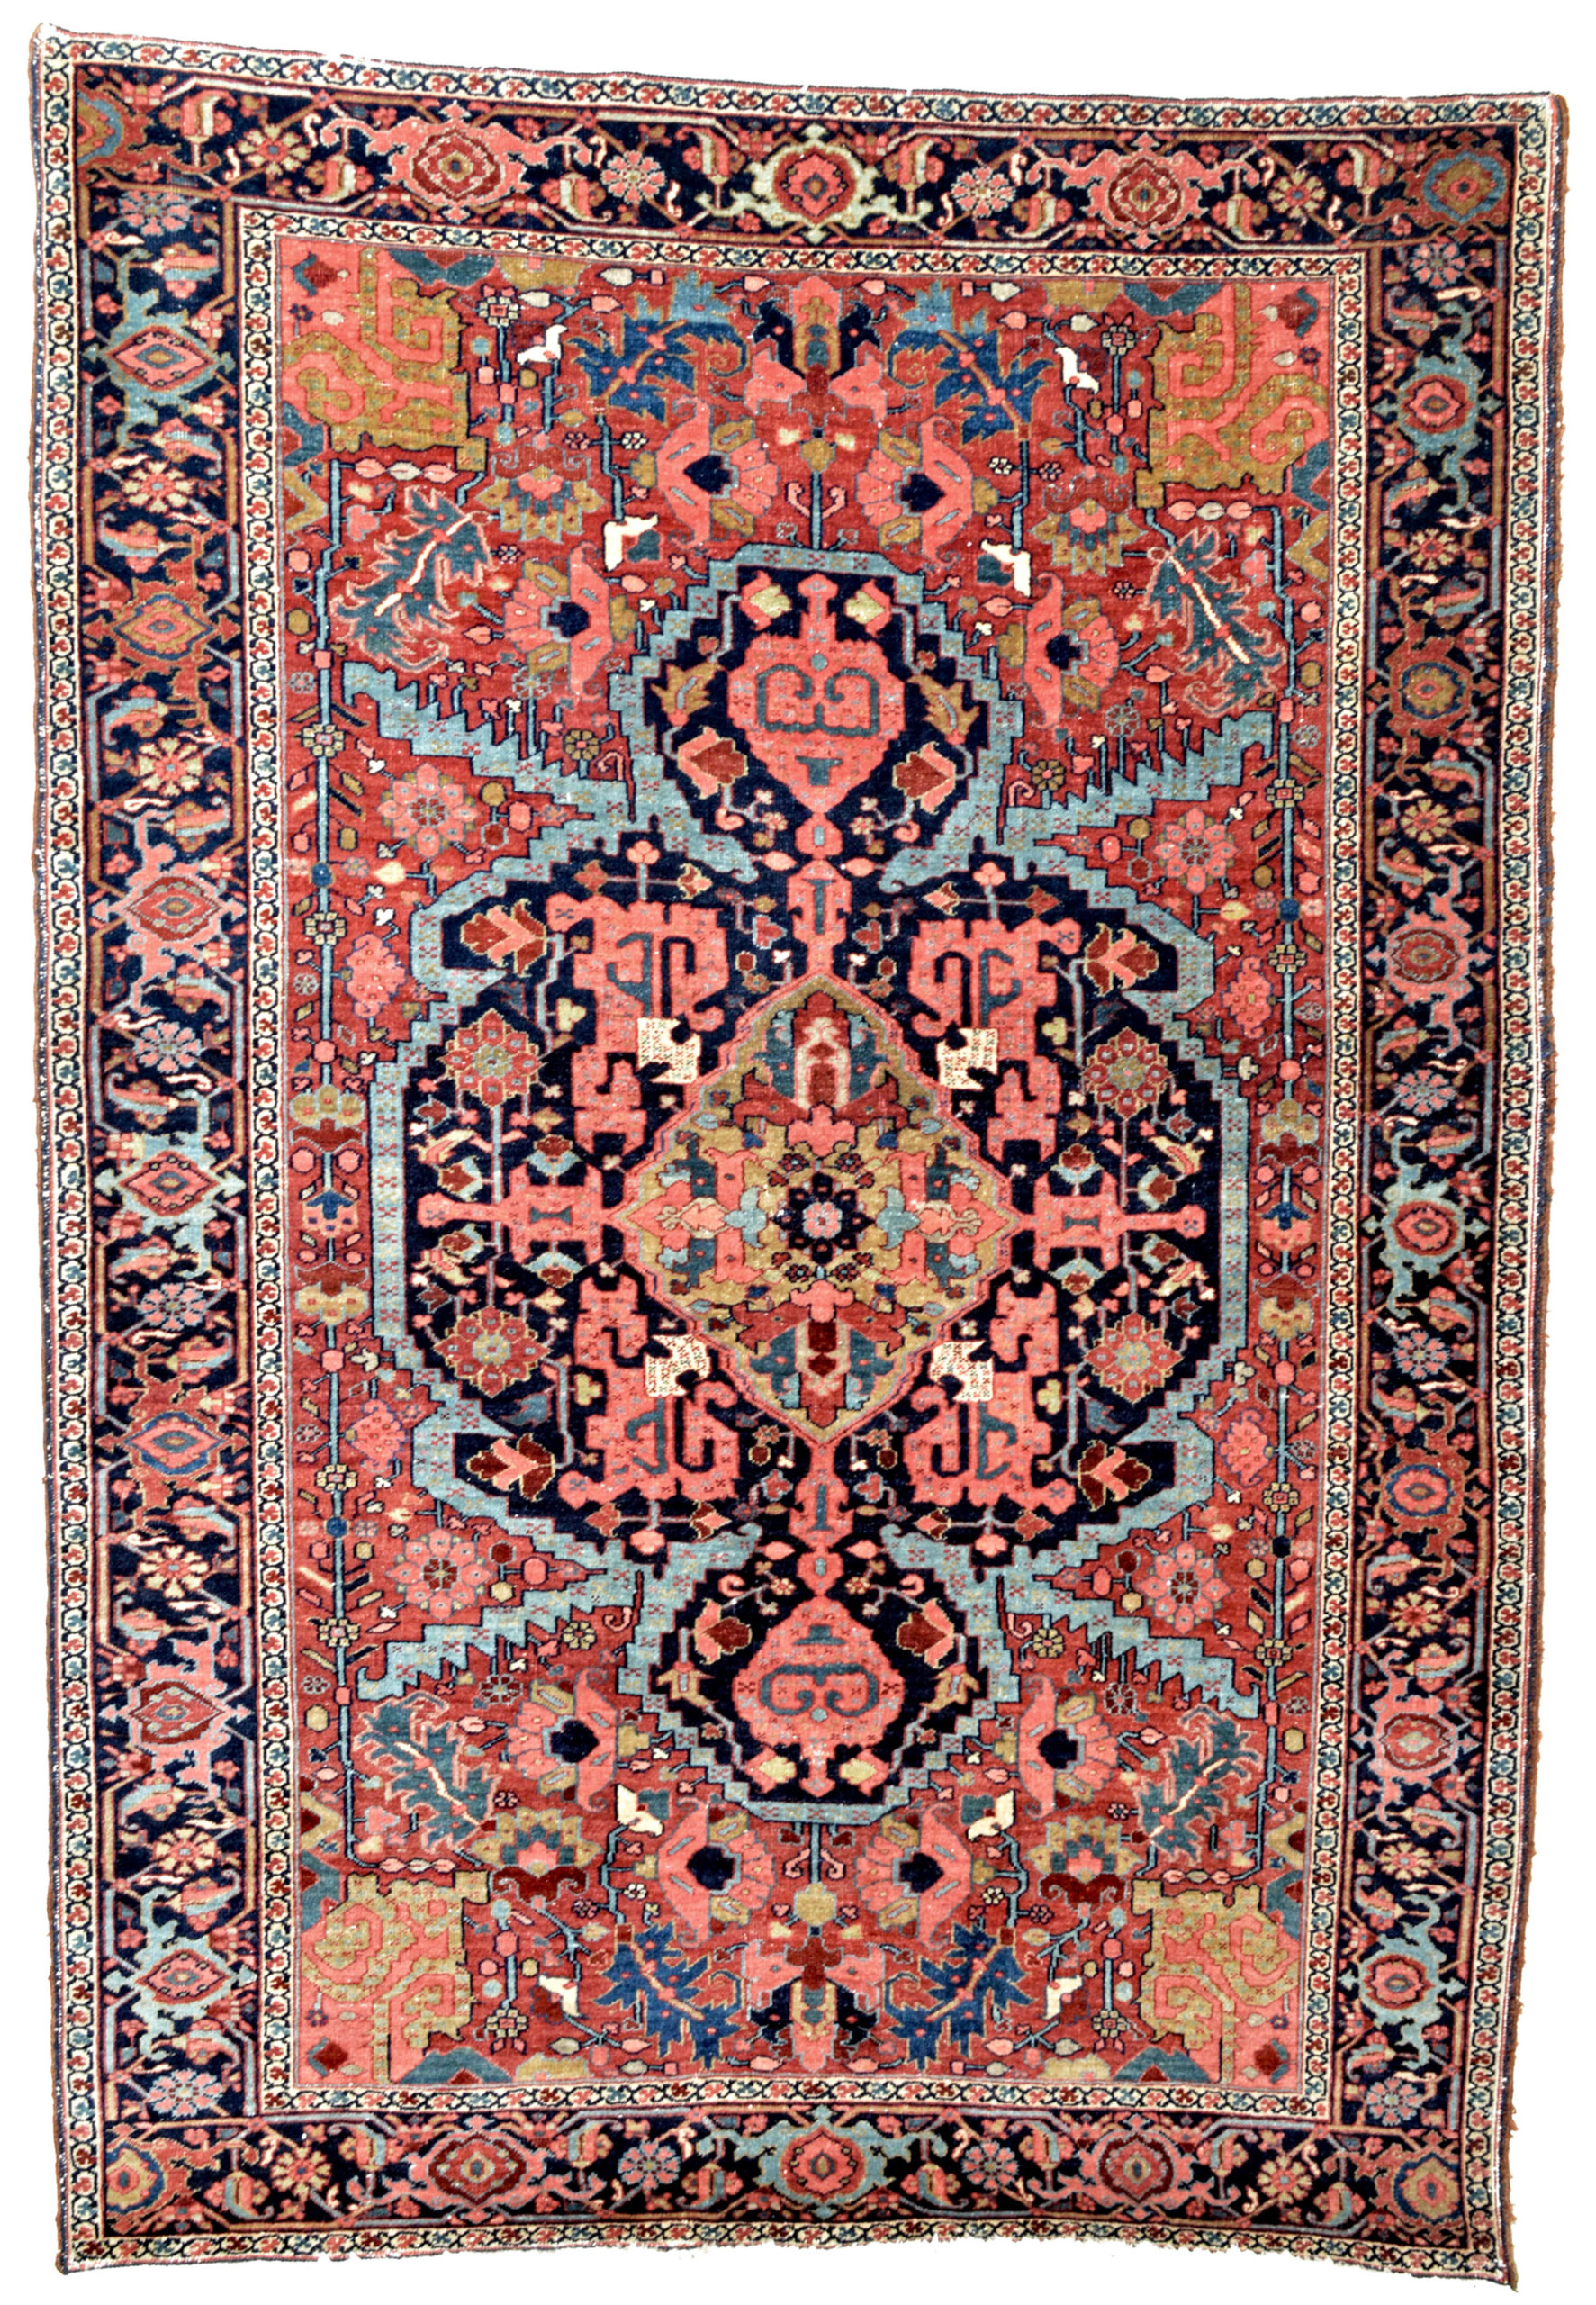 A finely woven antique Persian Heriz rug with a navy blue, Bakshaish style medallion on a brick red field that is framed by a navy blue border. Northwest Persia, circa 1900. Douglas Stock Gallery is a member of The Art & Antique Dealers League of America, and of the ADA and the international antiques organization CINOA. Antique rugs Boston Beacon Hill and Boston Back Bay, Brookline, Newton, Wellesley, Weston, Concord, South Natick,MA area